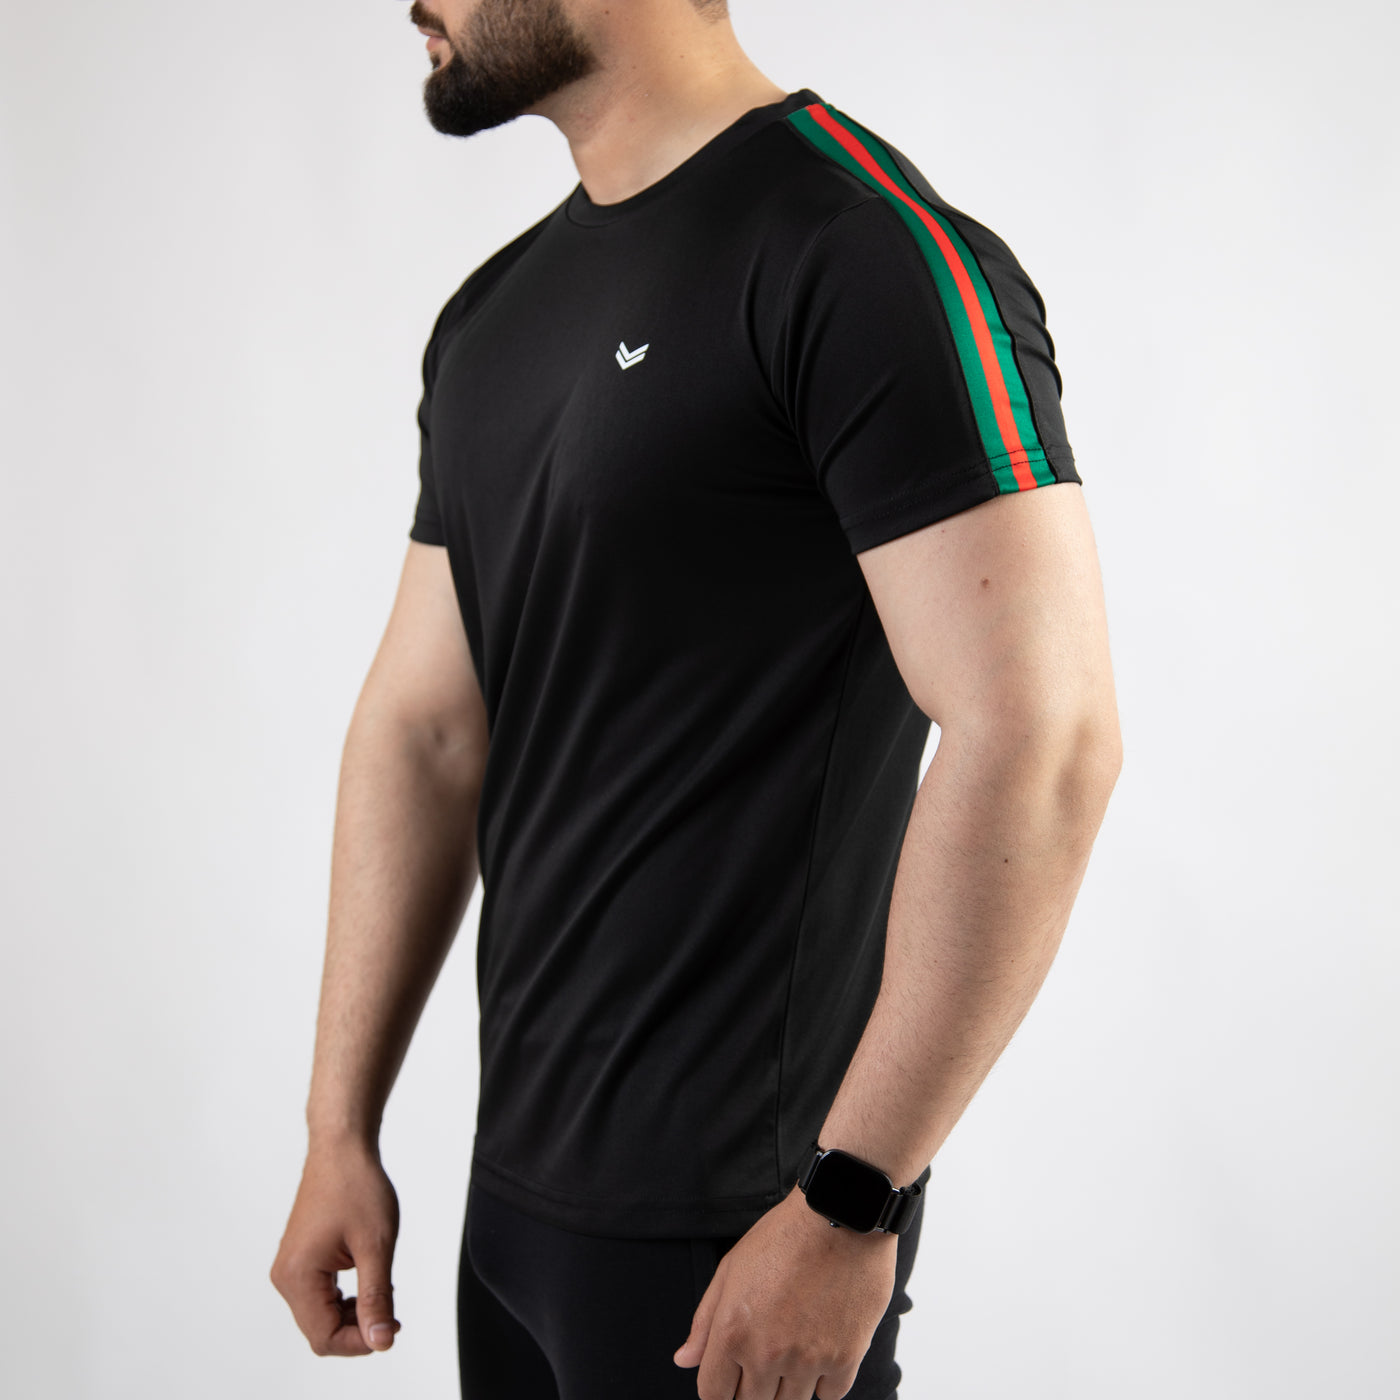 Black Quick Dry T-Shirt with Green & Red Panels on Sleeves